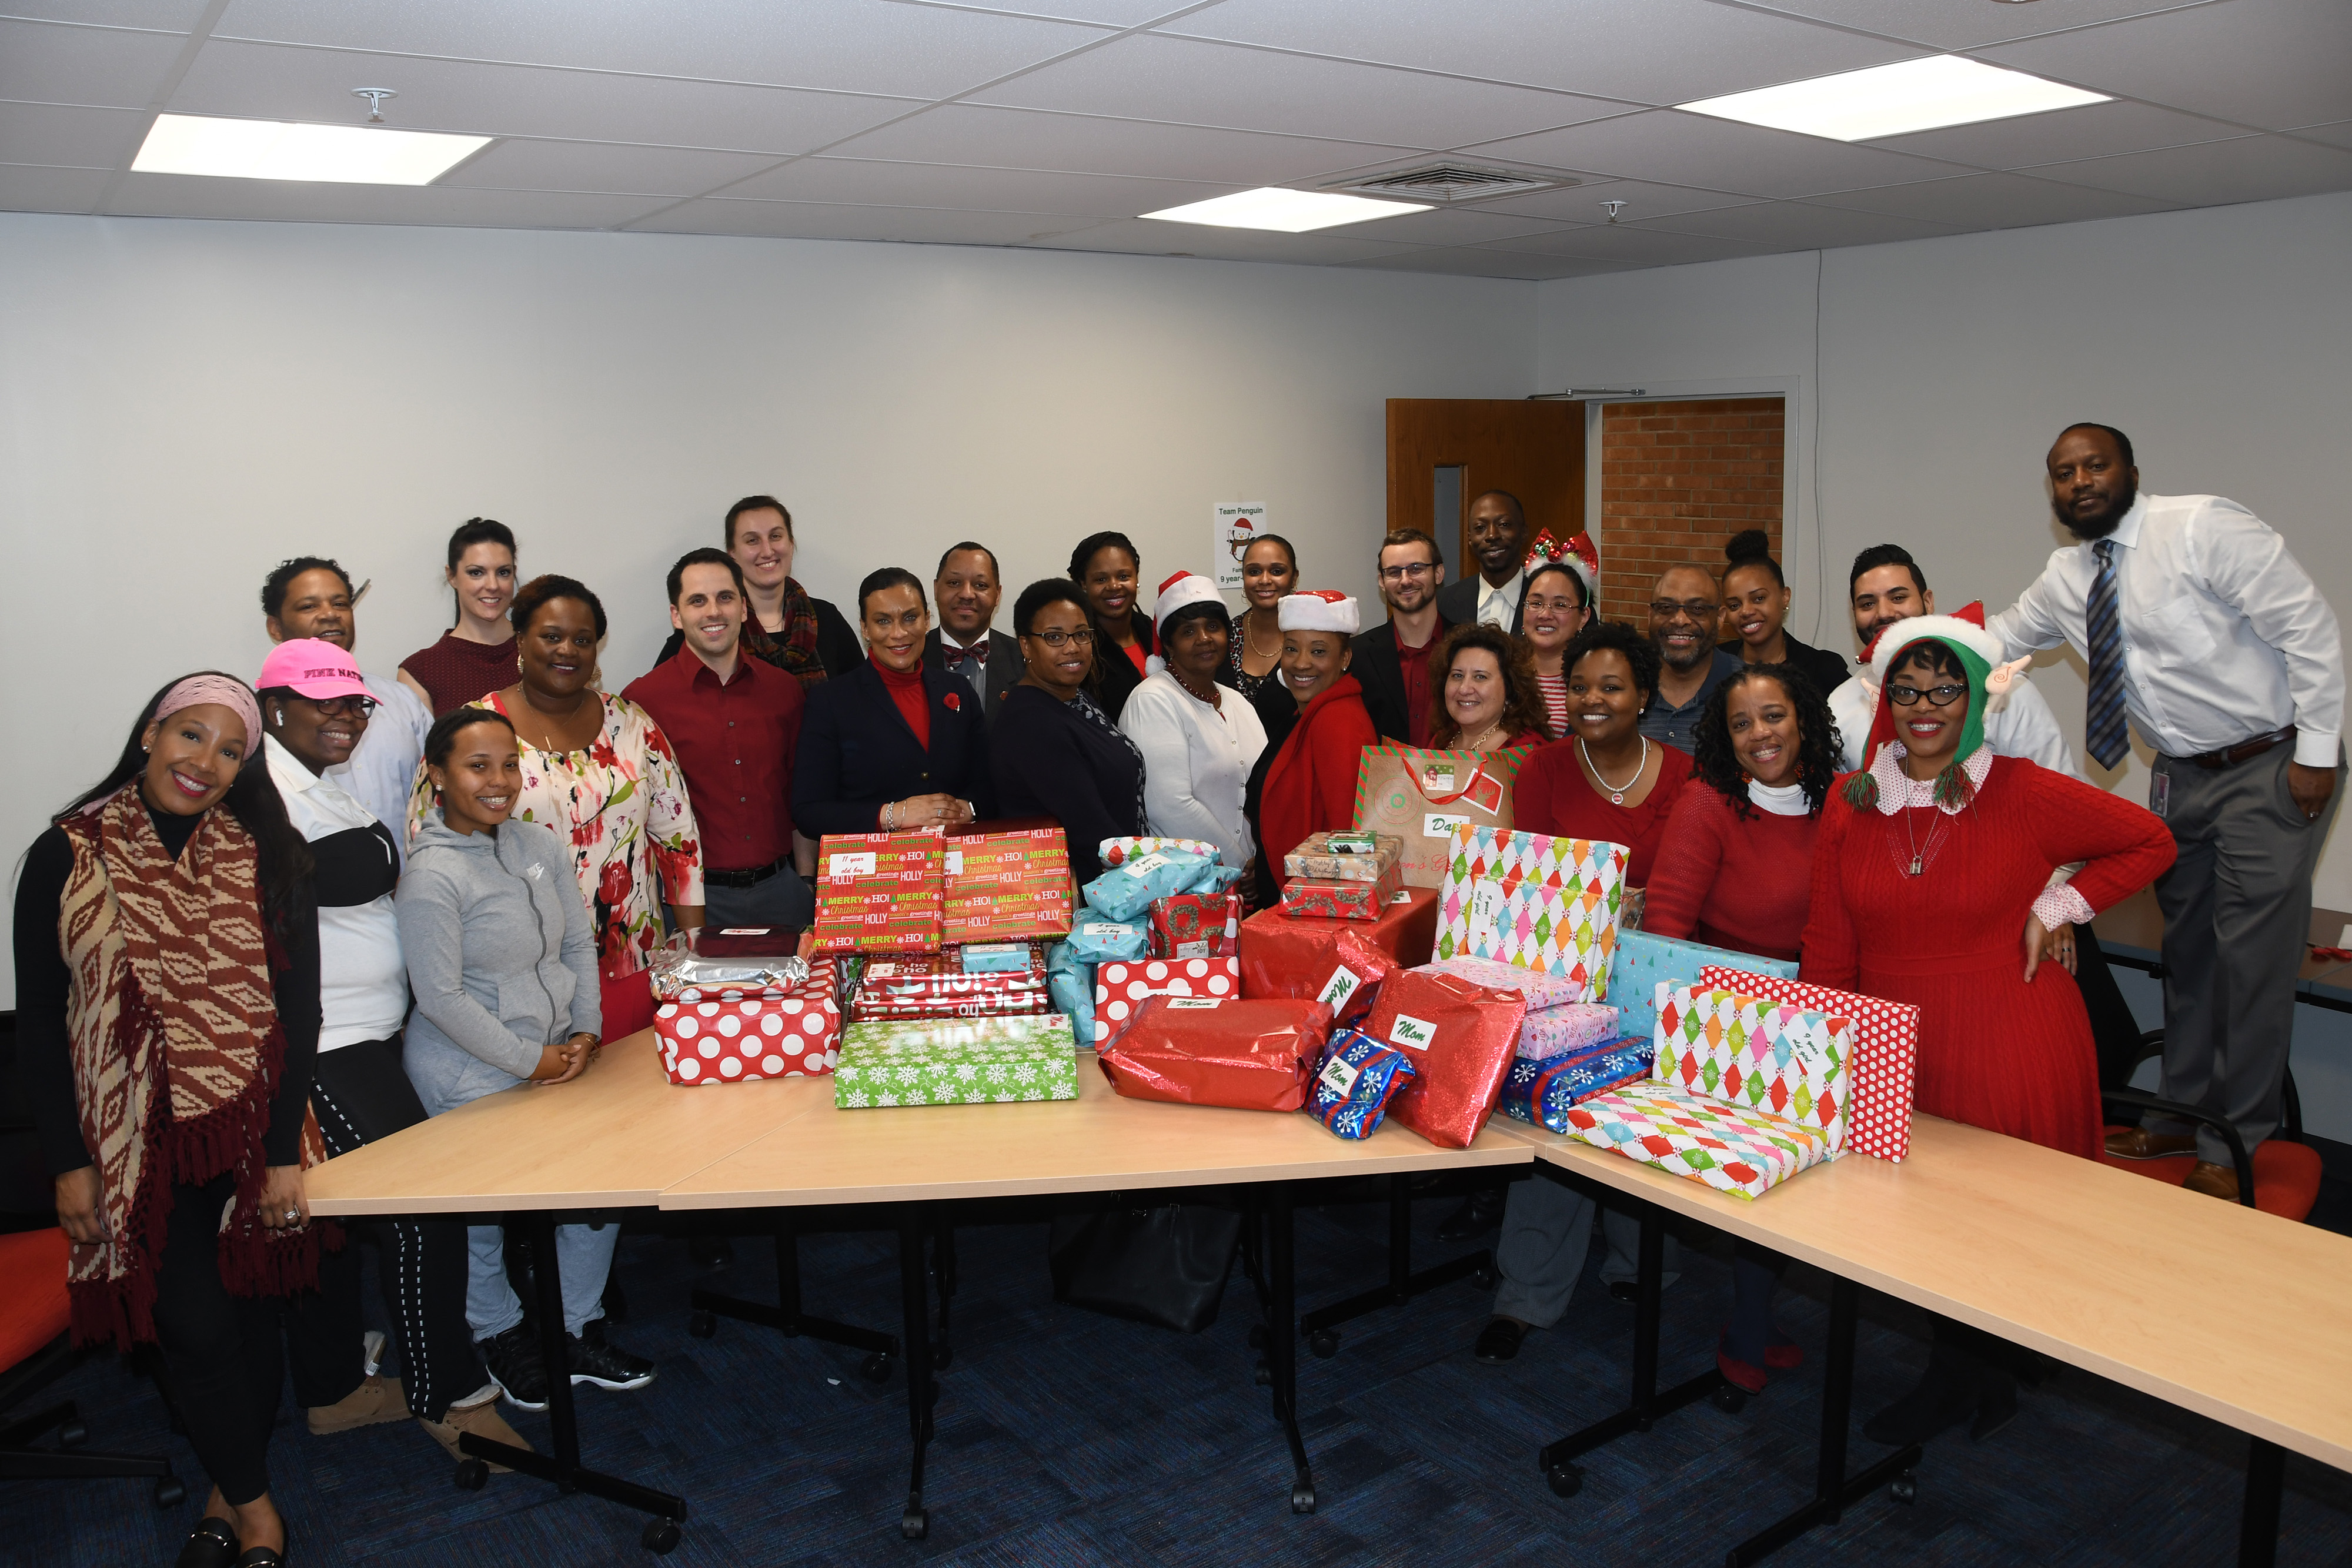 The Office of Student Success staff shows the fruits of their benevolence -- Christmas gifts for two disadvantaged families it has adopted for this holiday season.